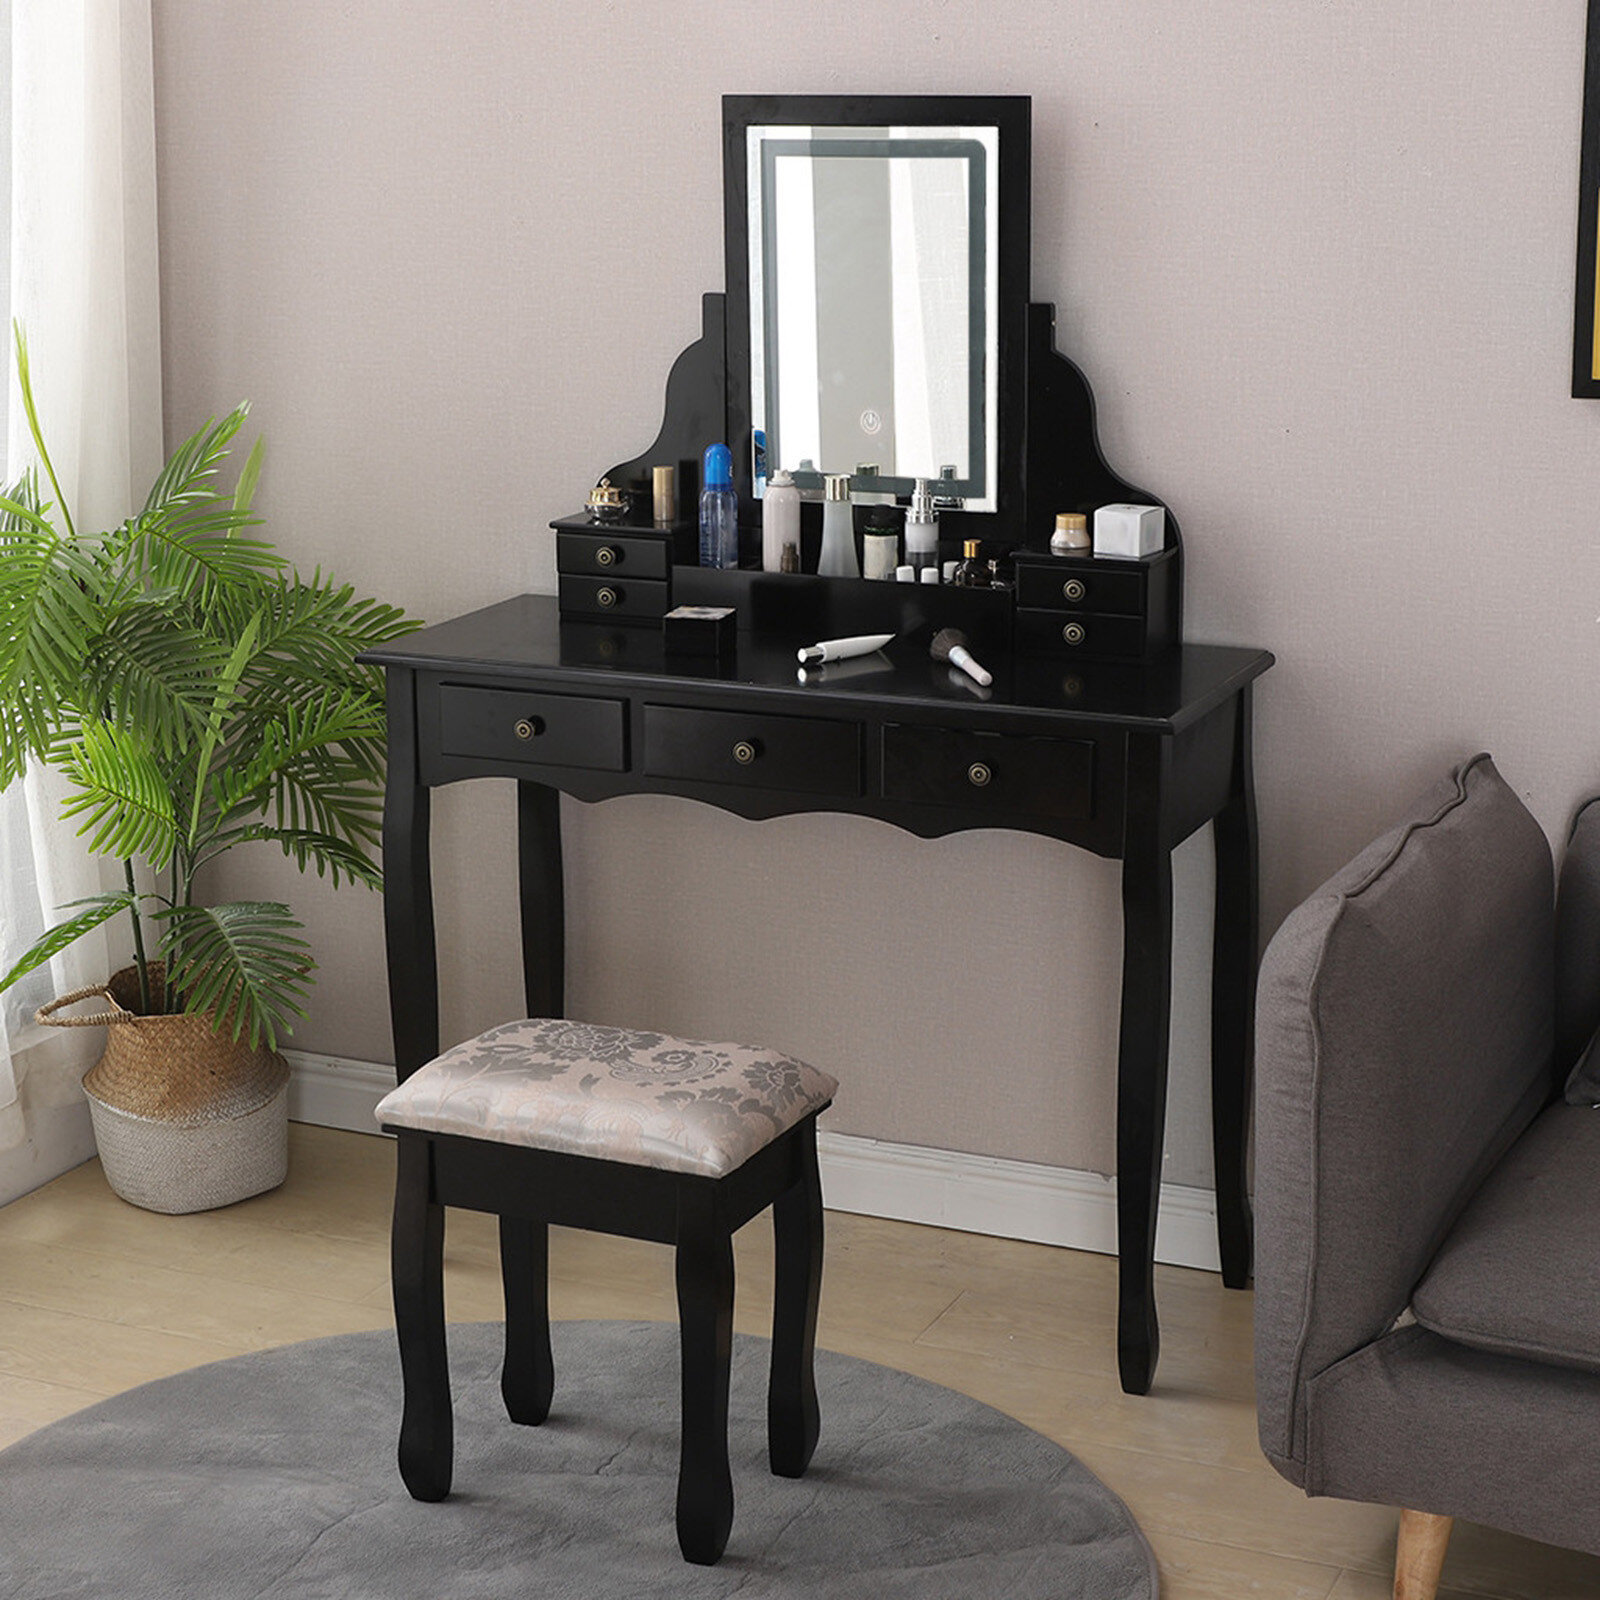 Details about   Dressing Table Vanity Makeup Table Vanity Set W/ Touching Screen Dimming Mirror 